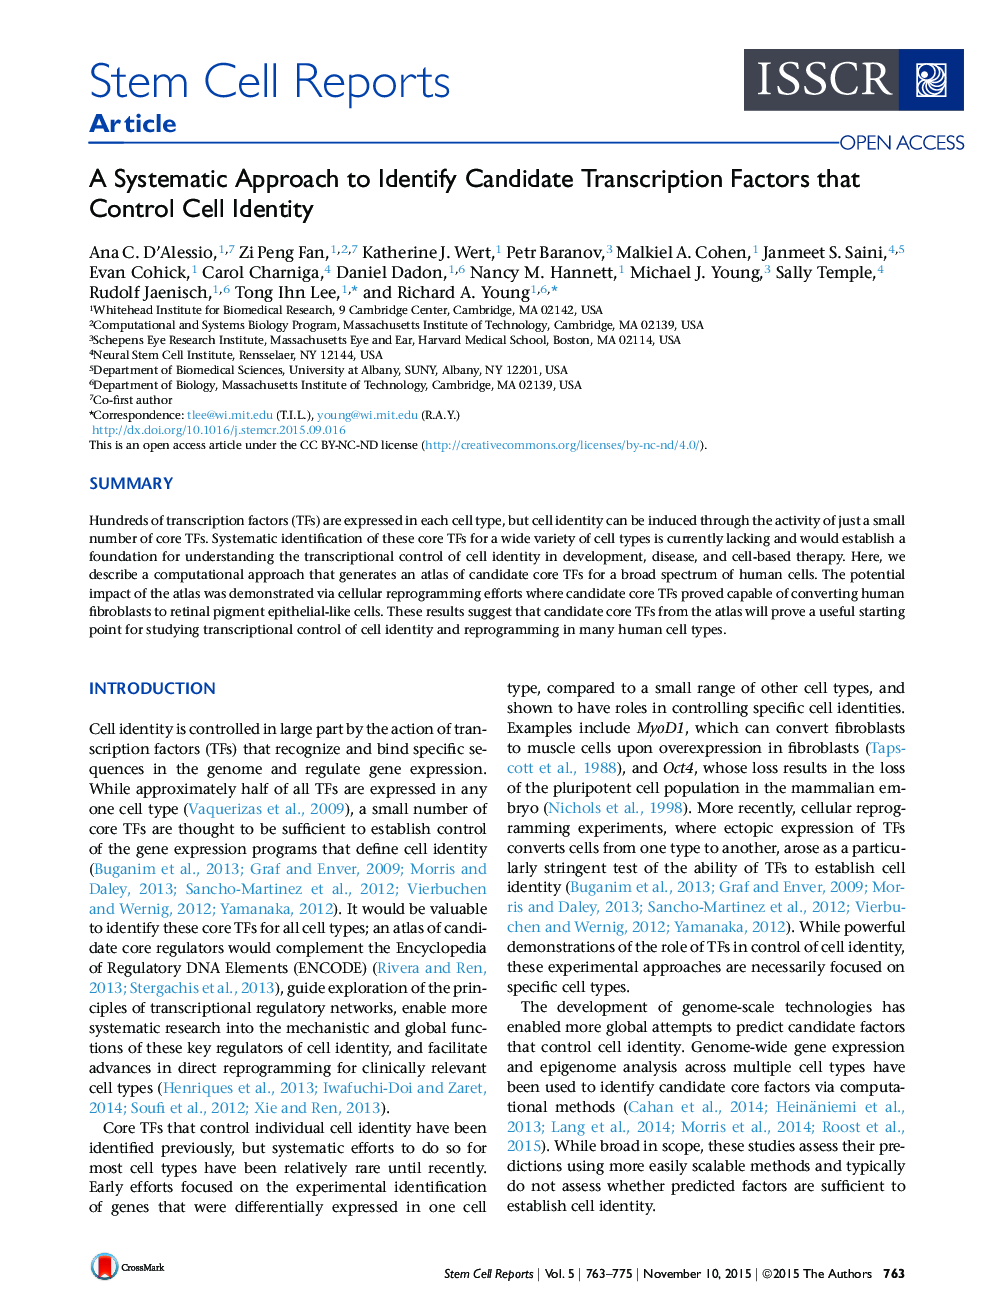 A Systematic Approach to Identify Candidate Transcription Factors that Control Cell Identity 